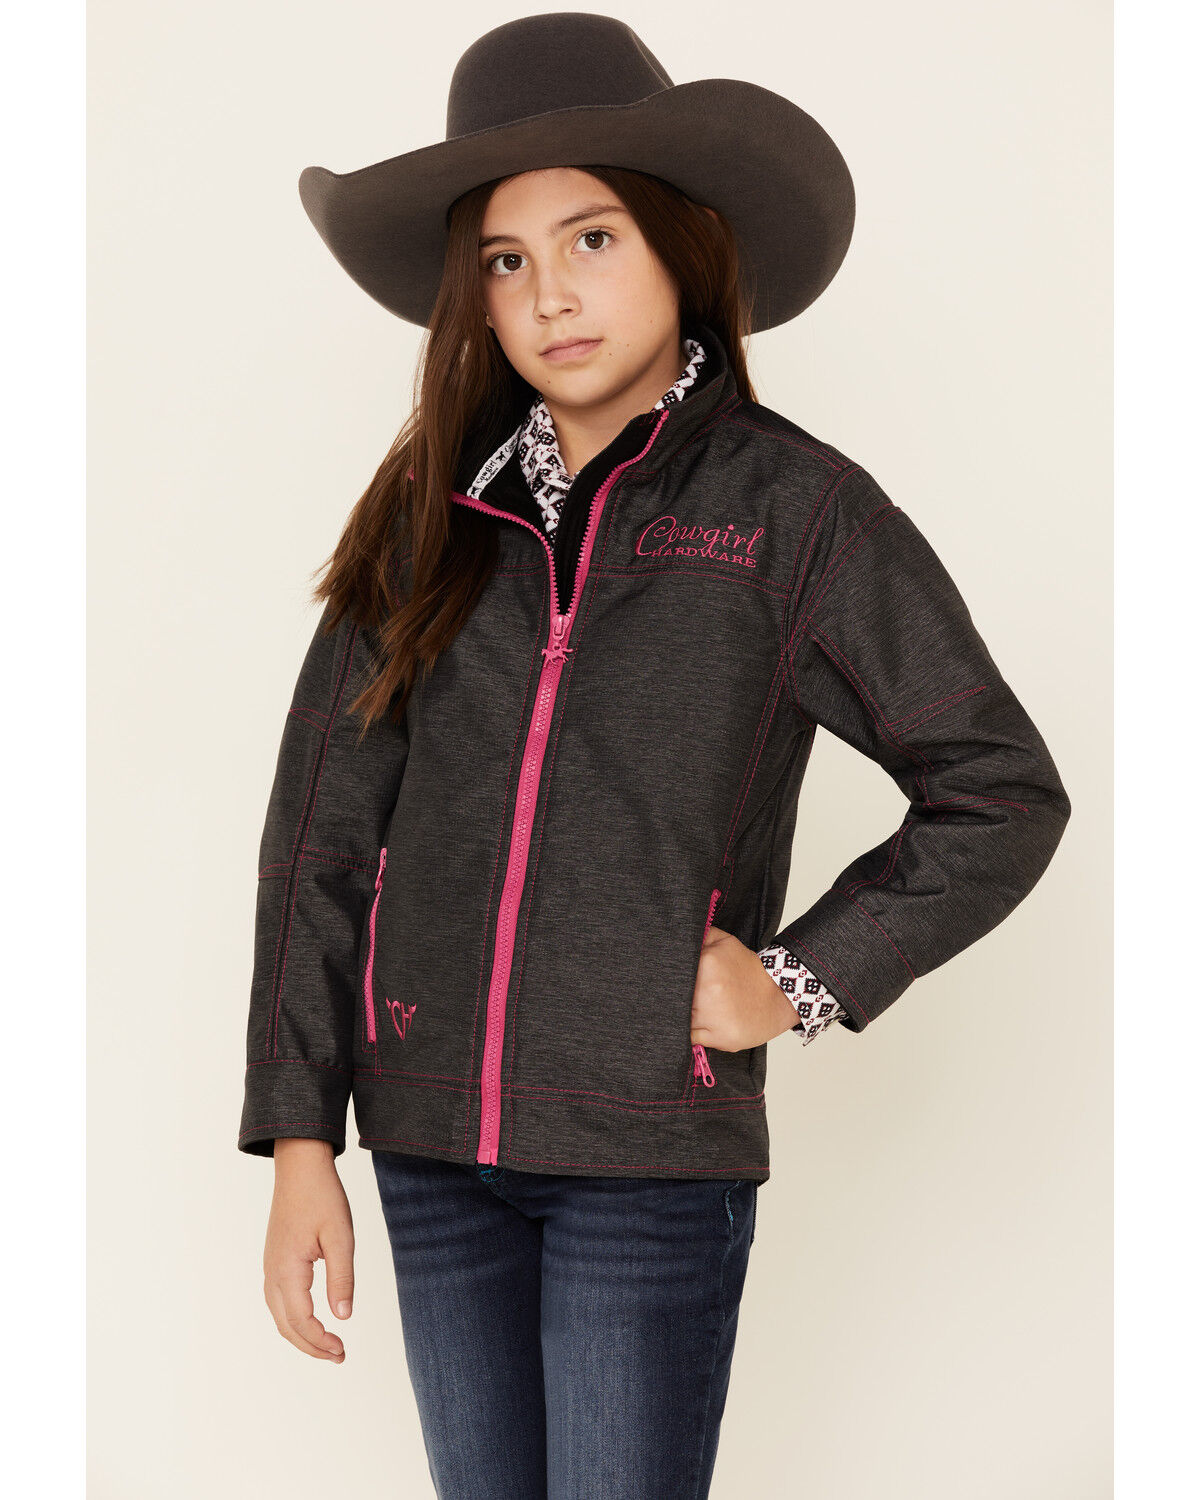 Cowgirl Hardware Girls' Brown Burnout Rodeo Rock Star Hooded Pullover 471223-660